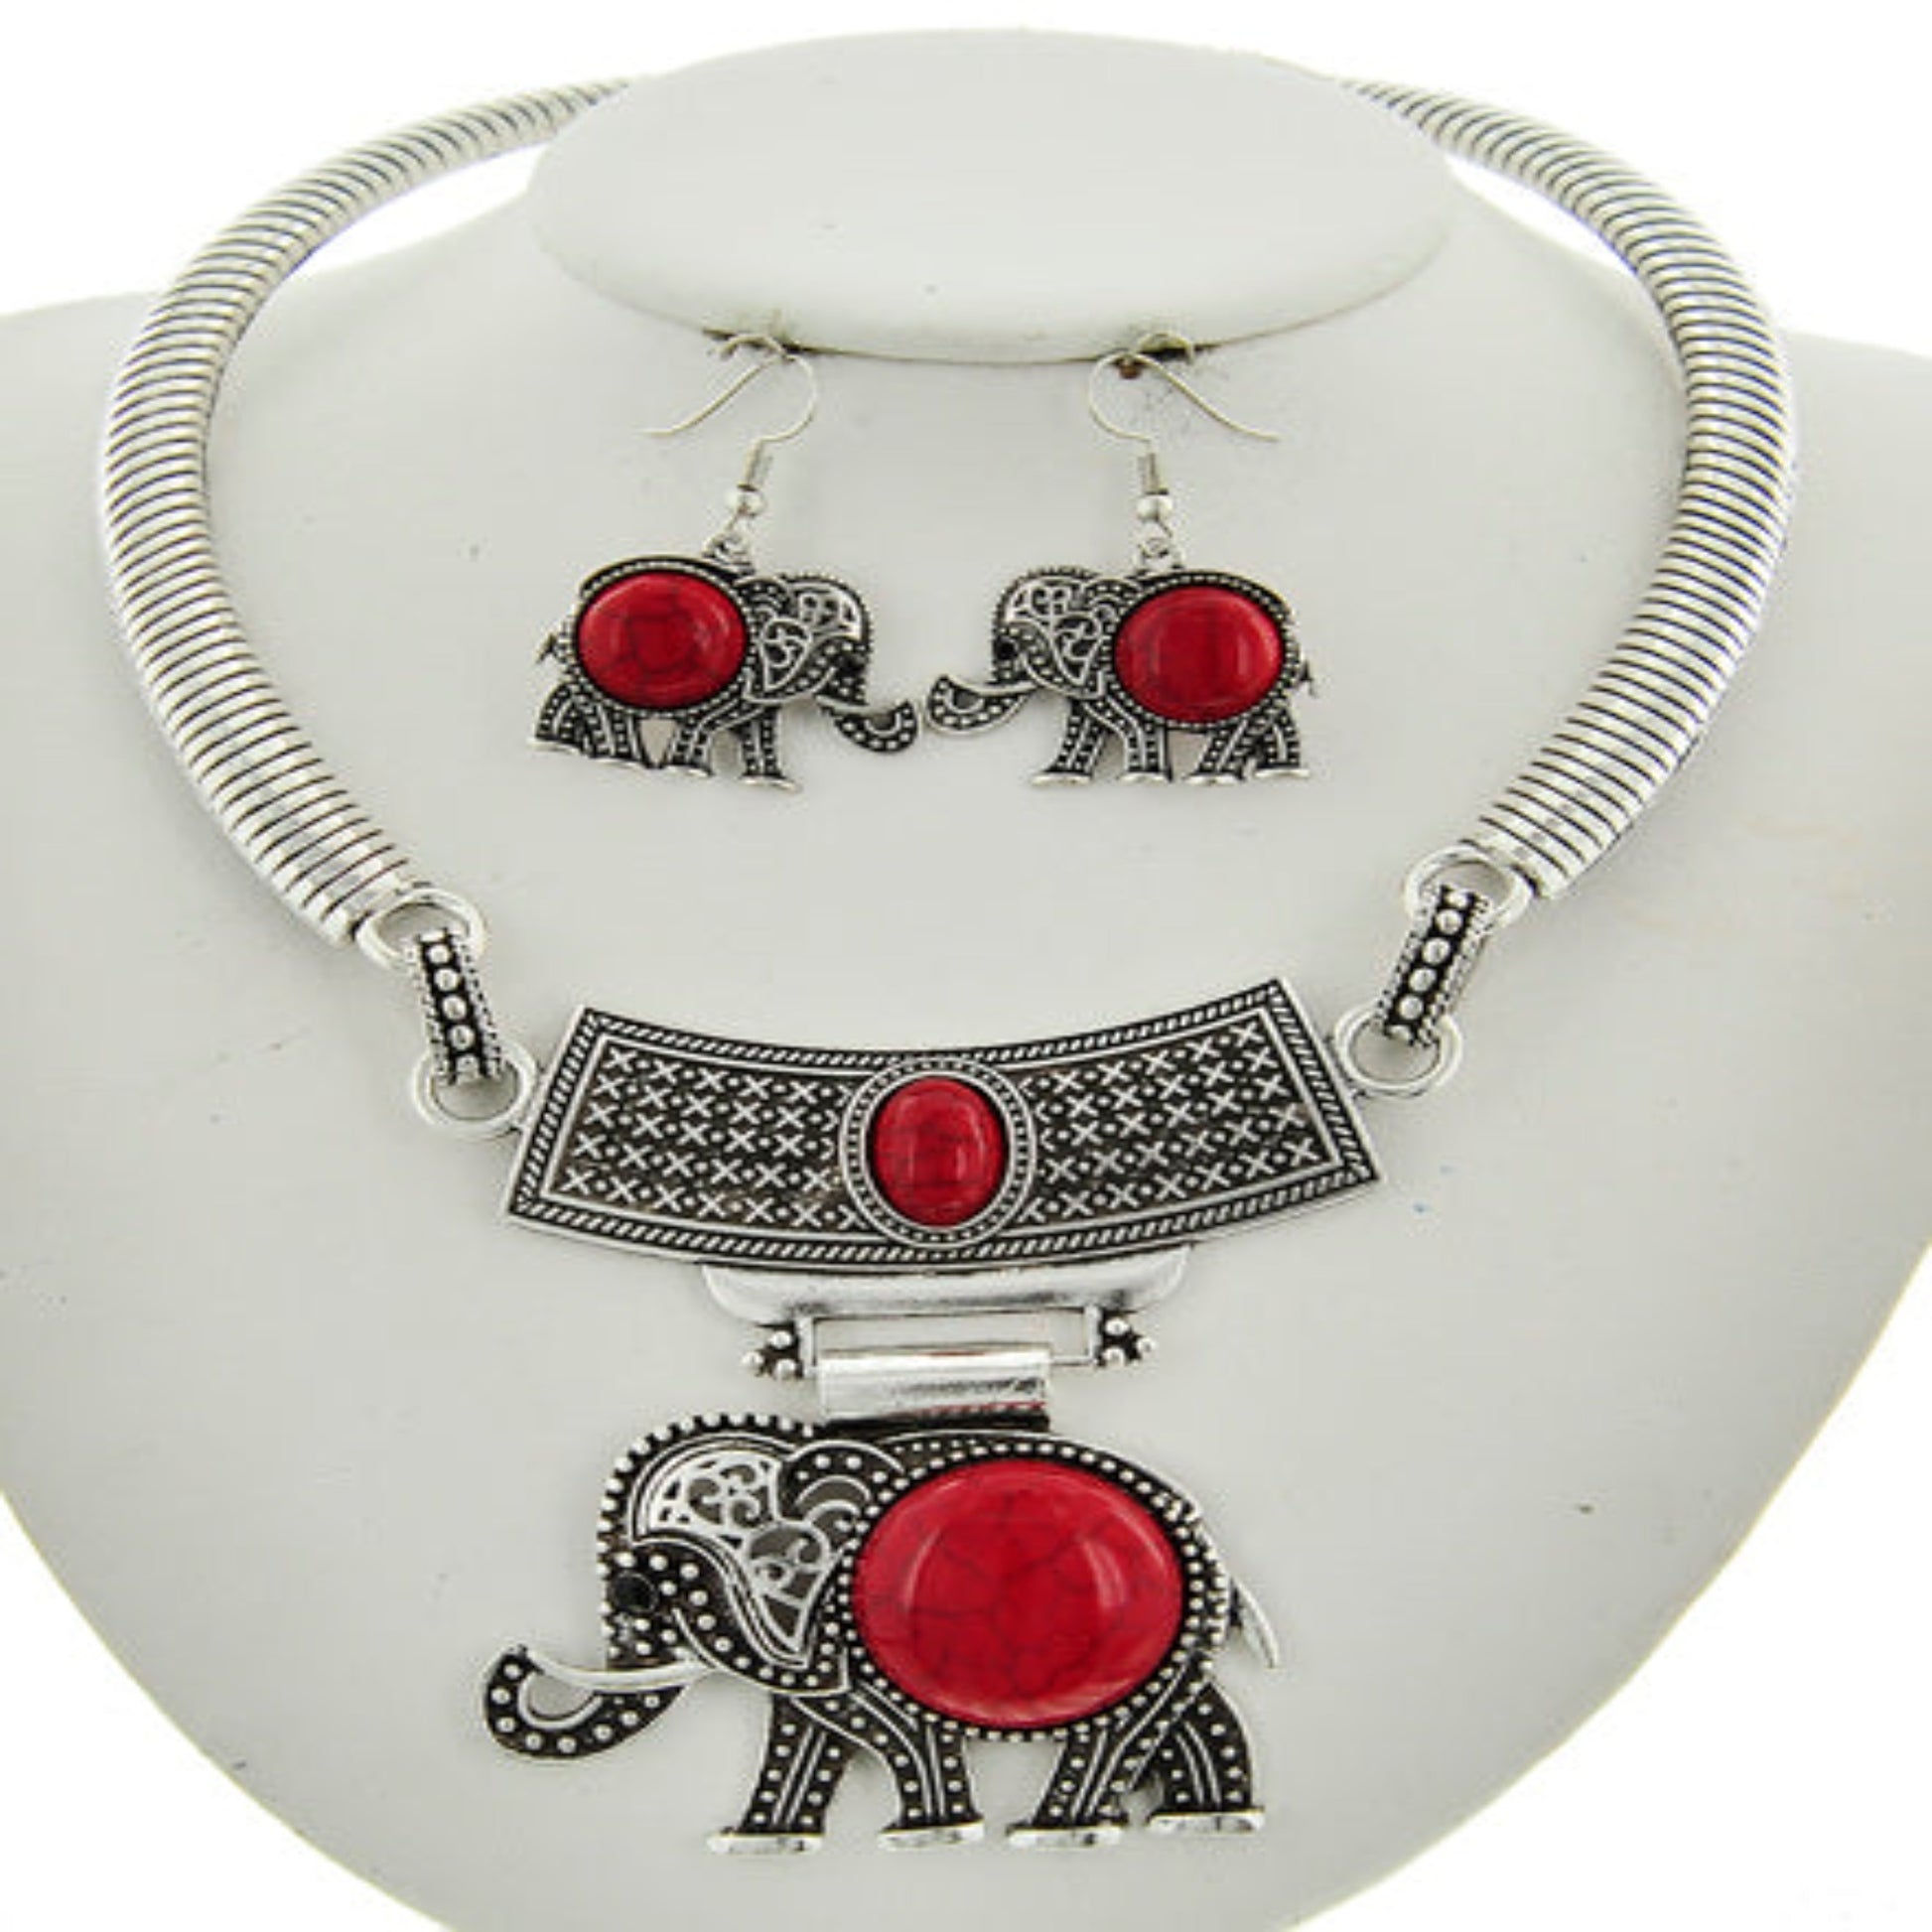 Antique Silver look and Red elephant pendant necklace and earrings set